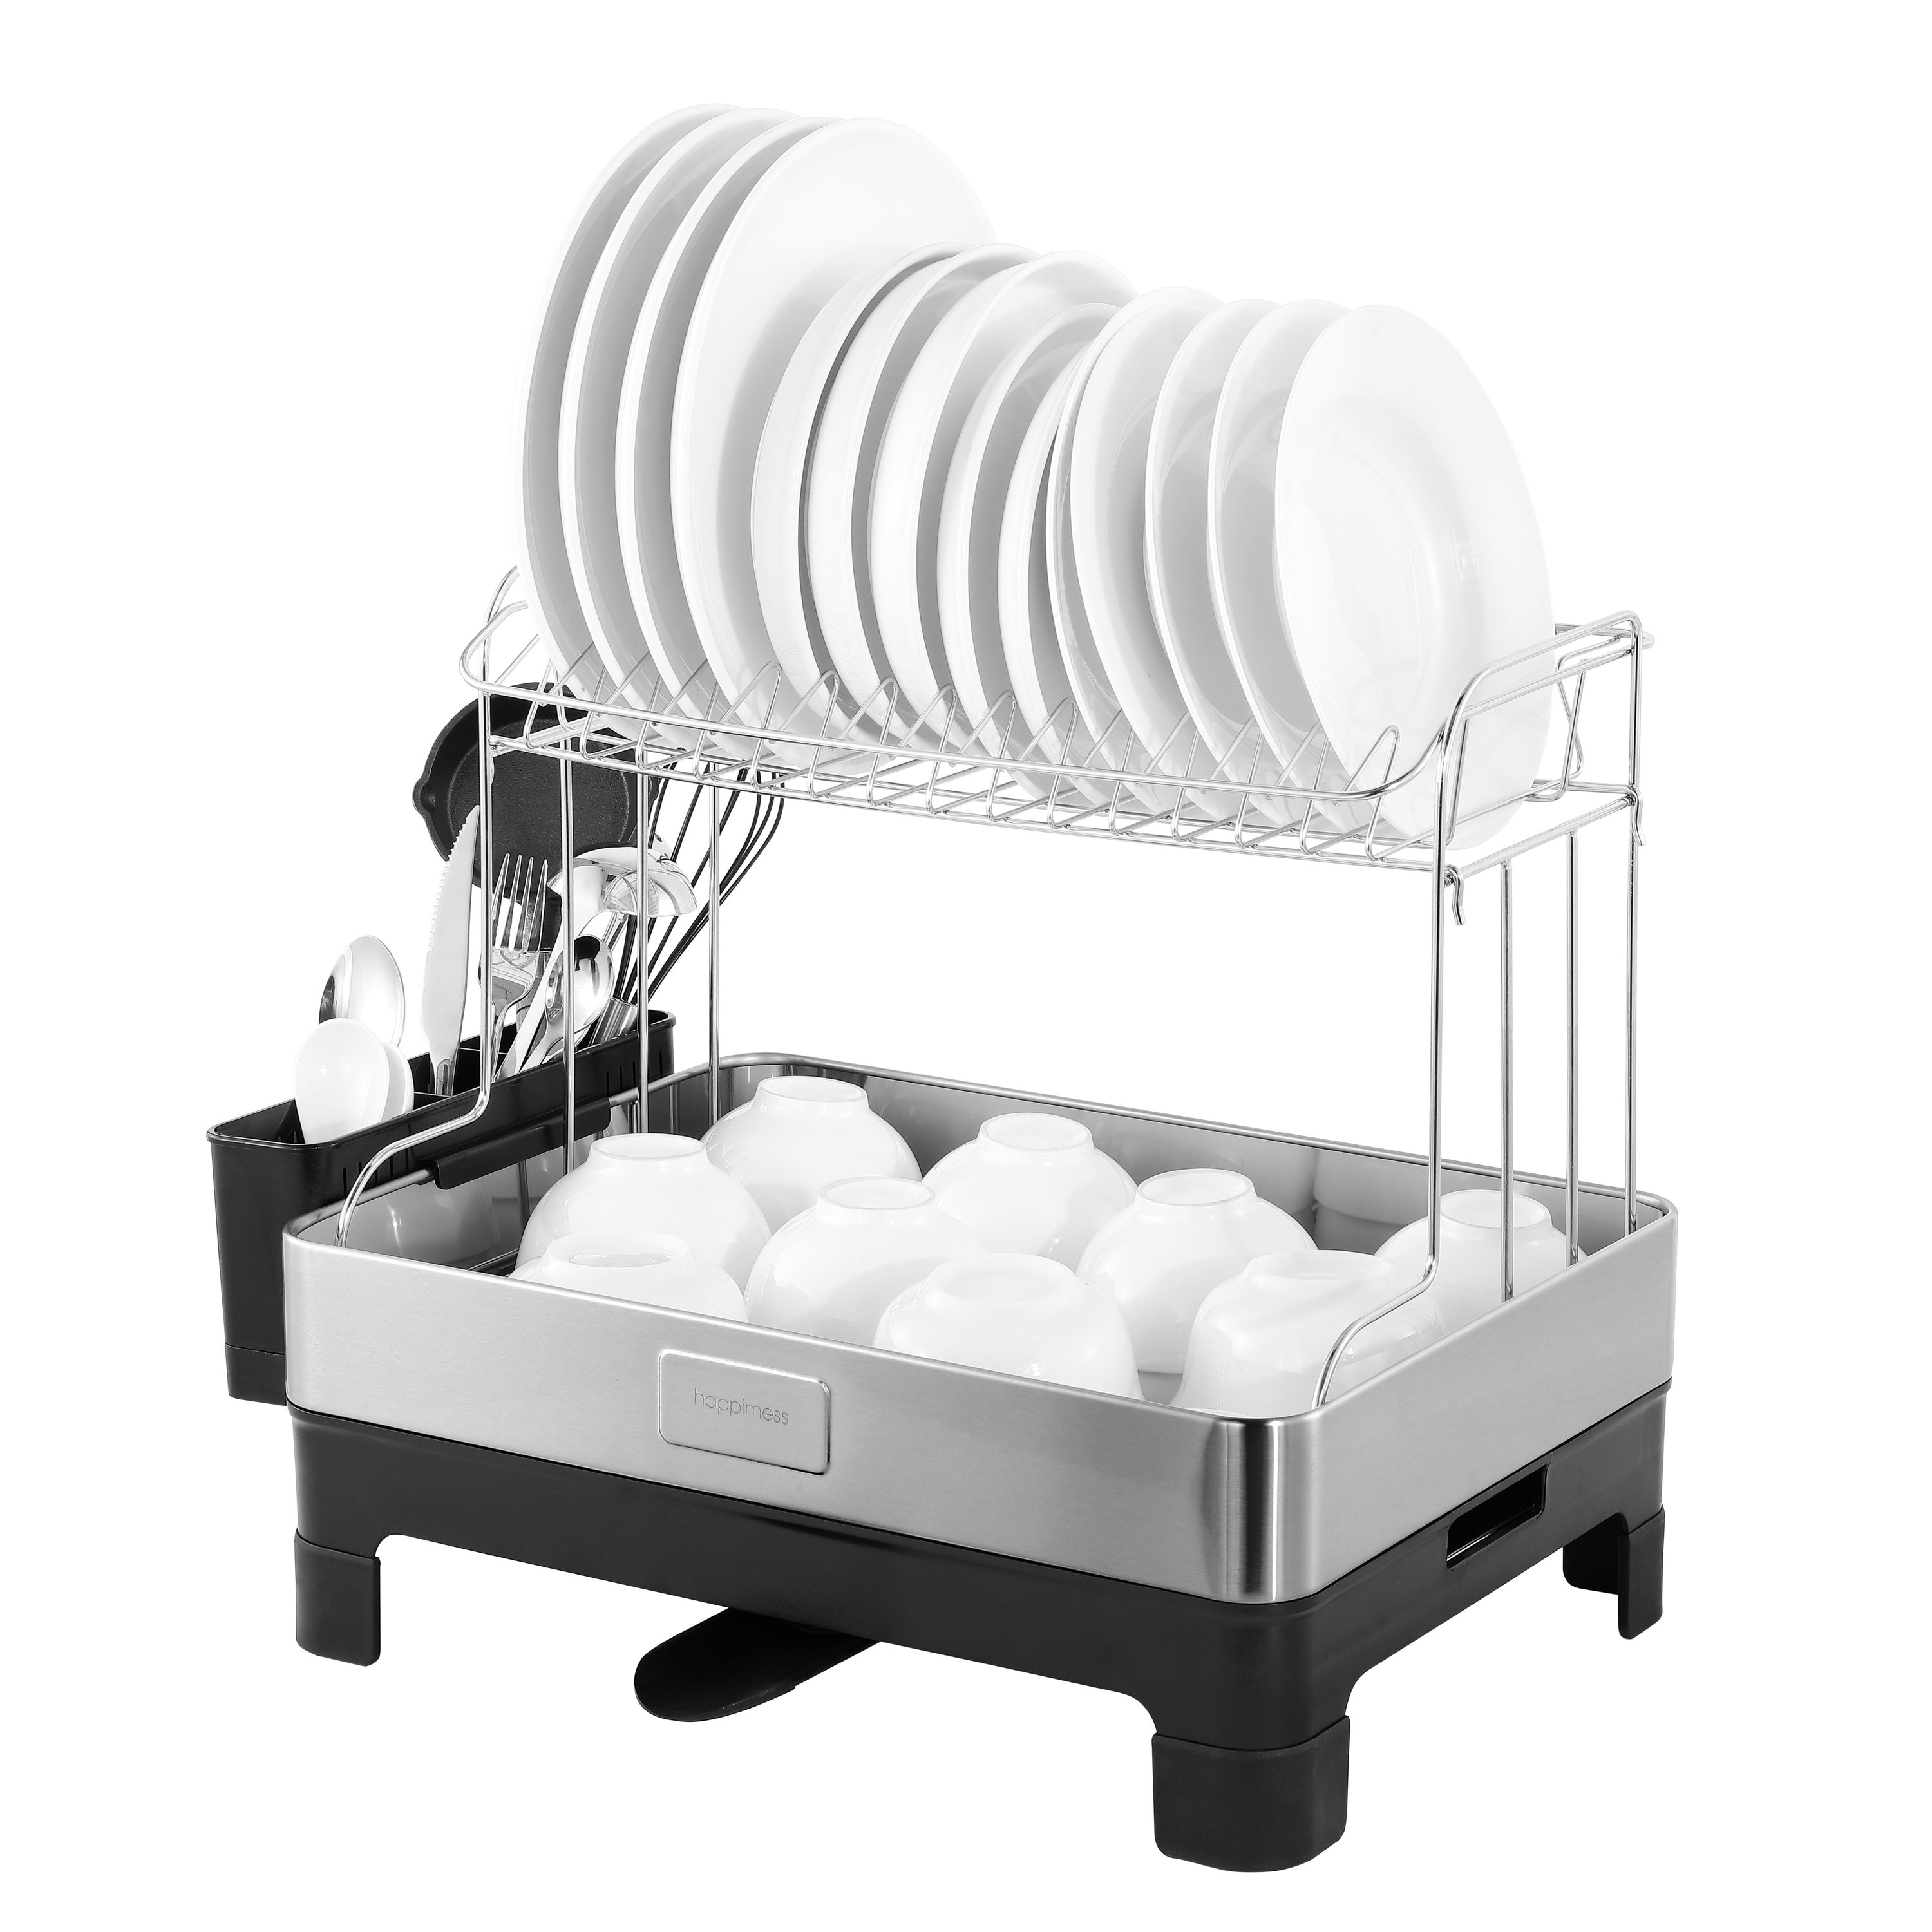 Style Selections 12-in W x 13.77-in L x 4.92-in H Stainless Steel Dish Rack  in the Dish Racks & Trays department at